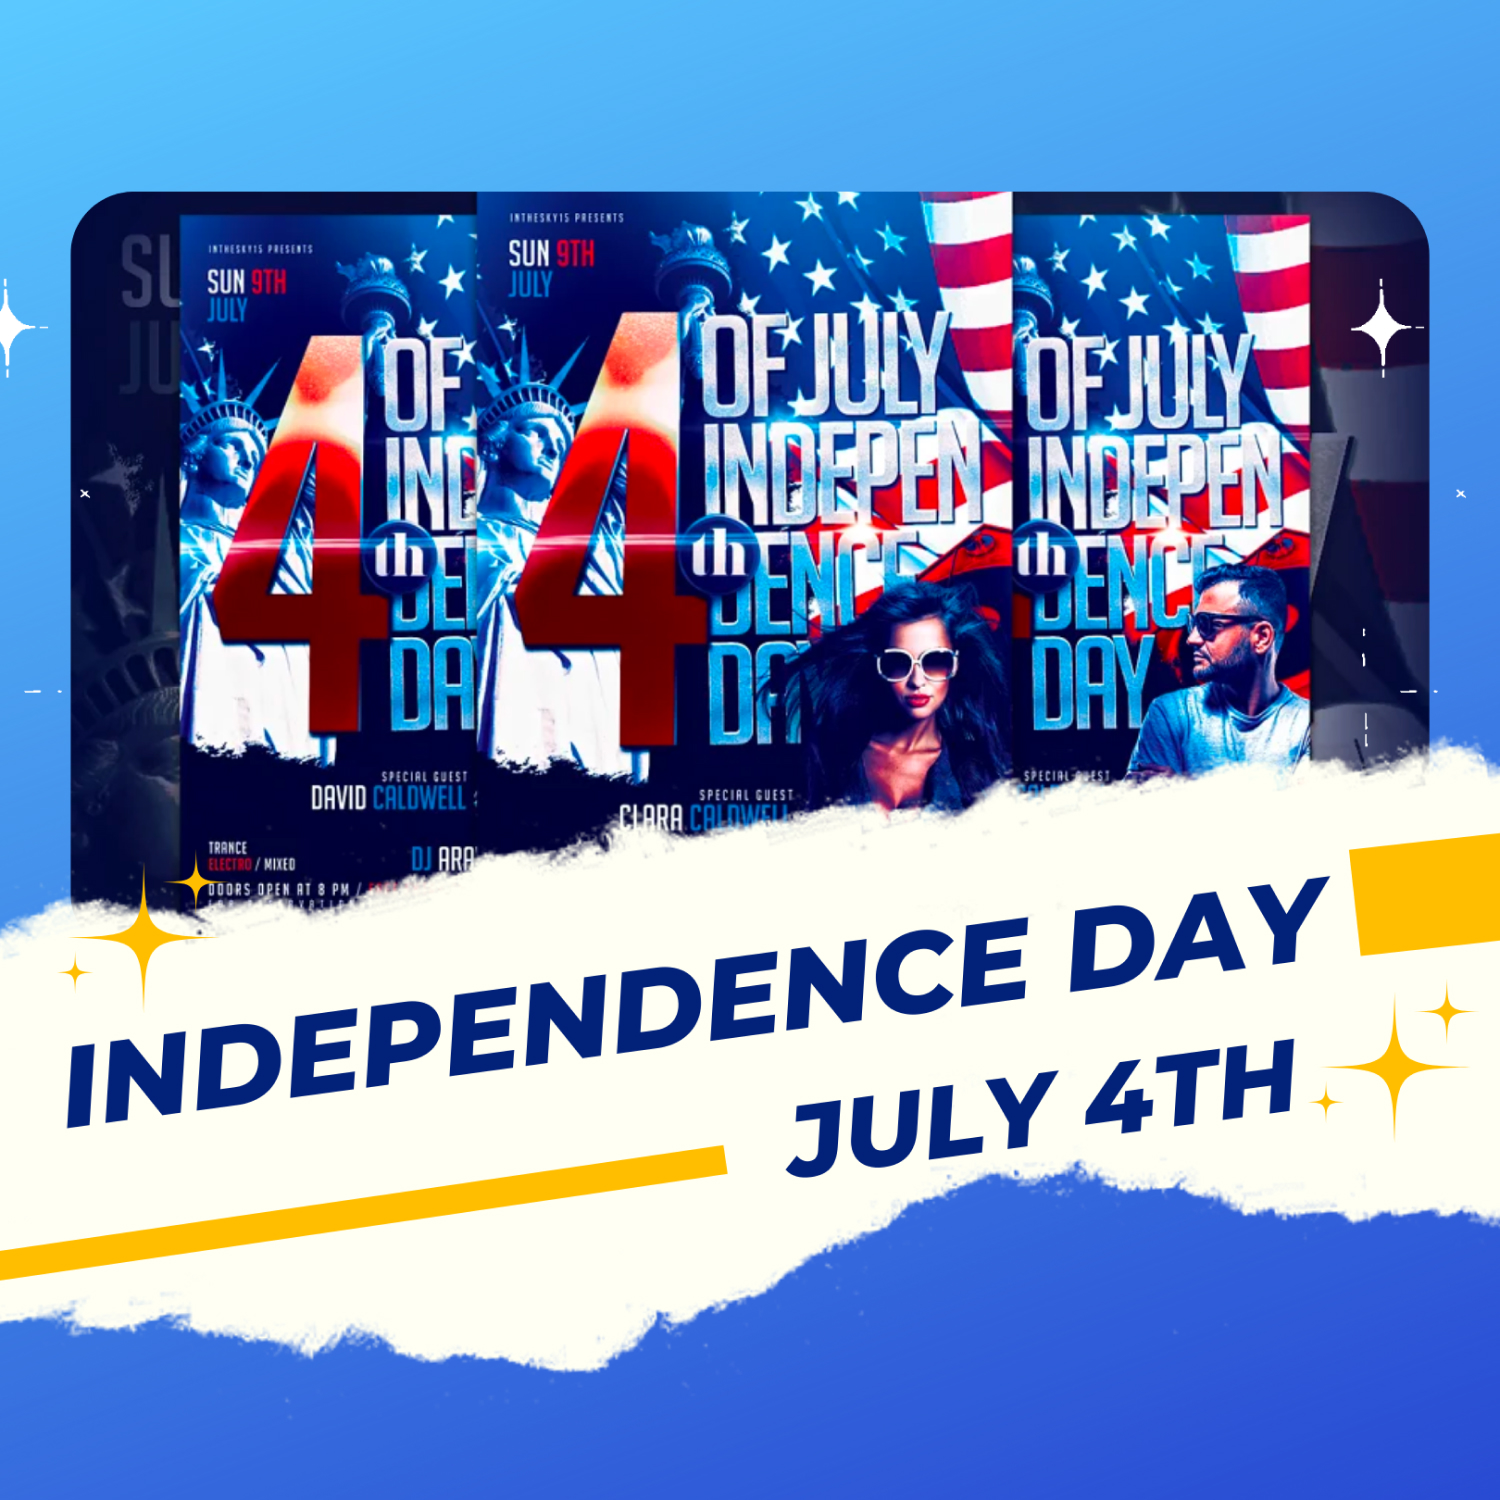 July 4th Independence Day Flyer.